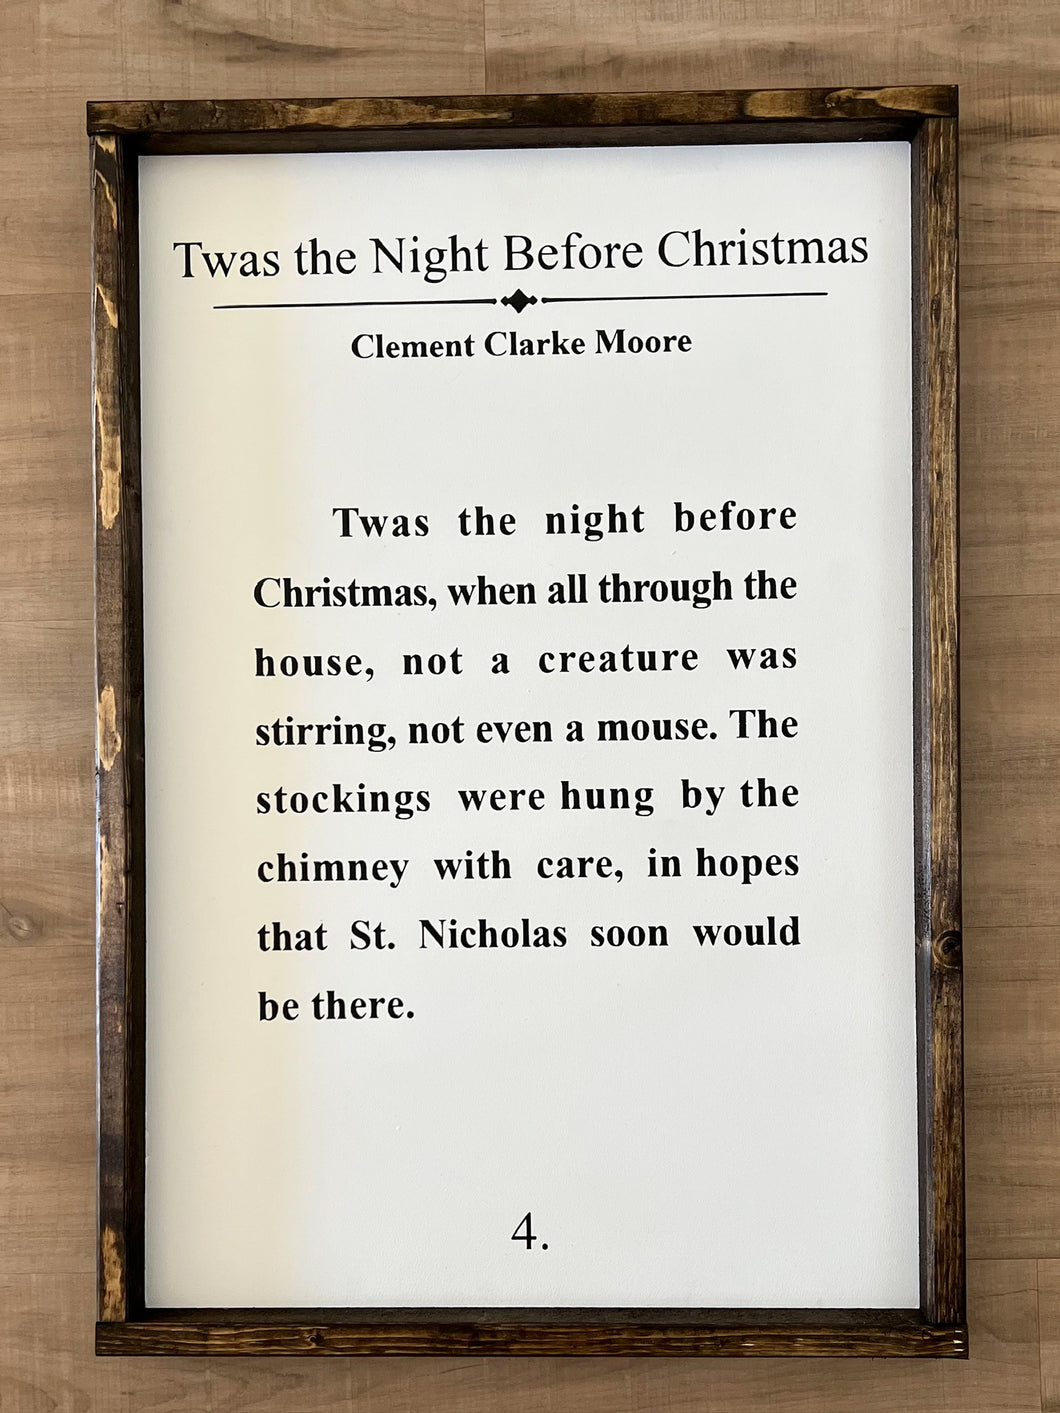 Twas the night before Christmas